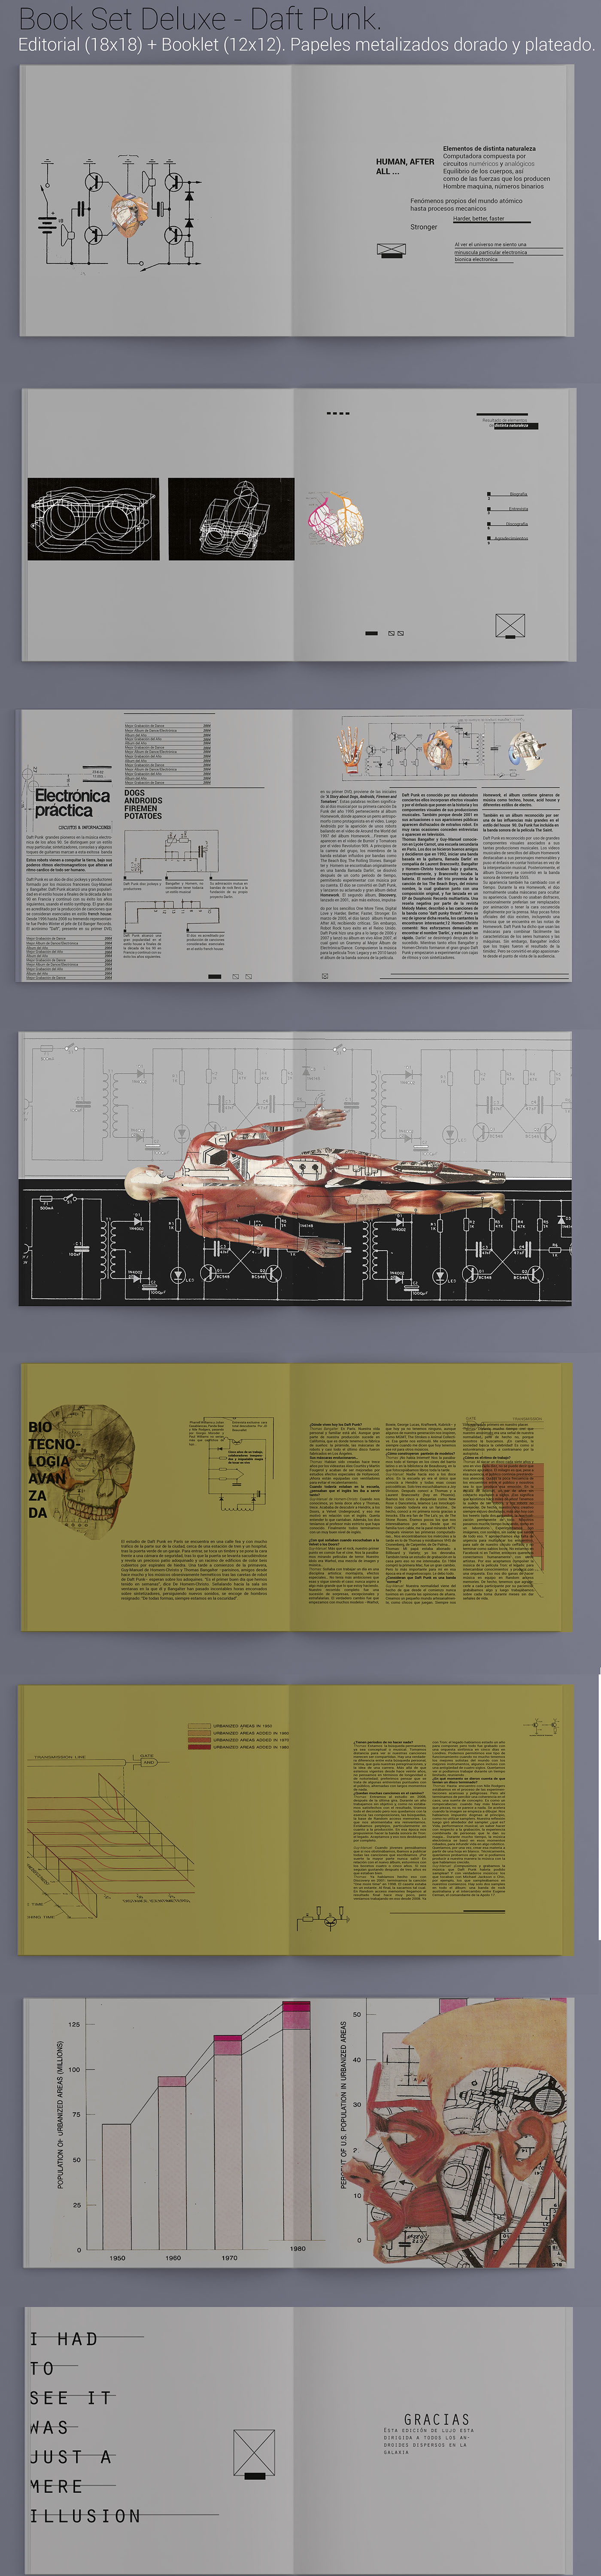 music graphic desing editorial Booklet daft punk book editorial poster postal tickets cd´s